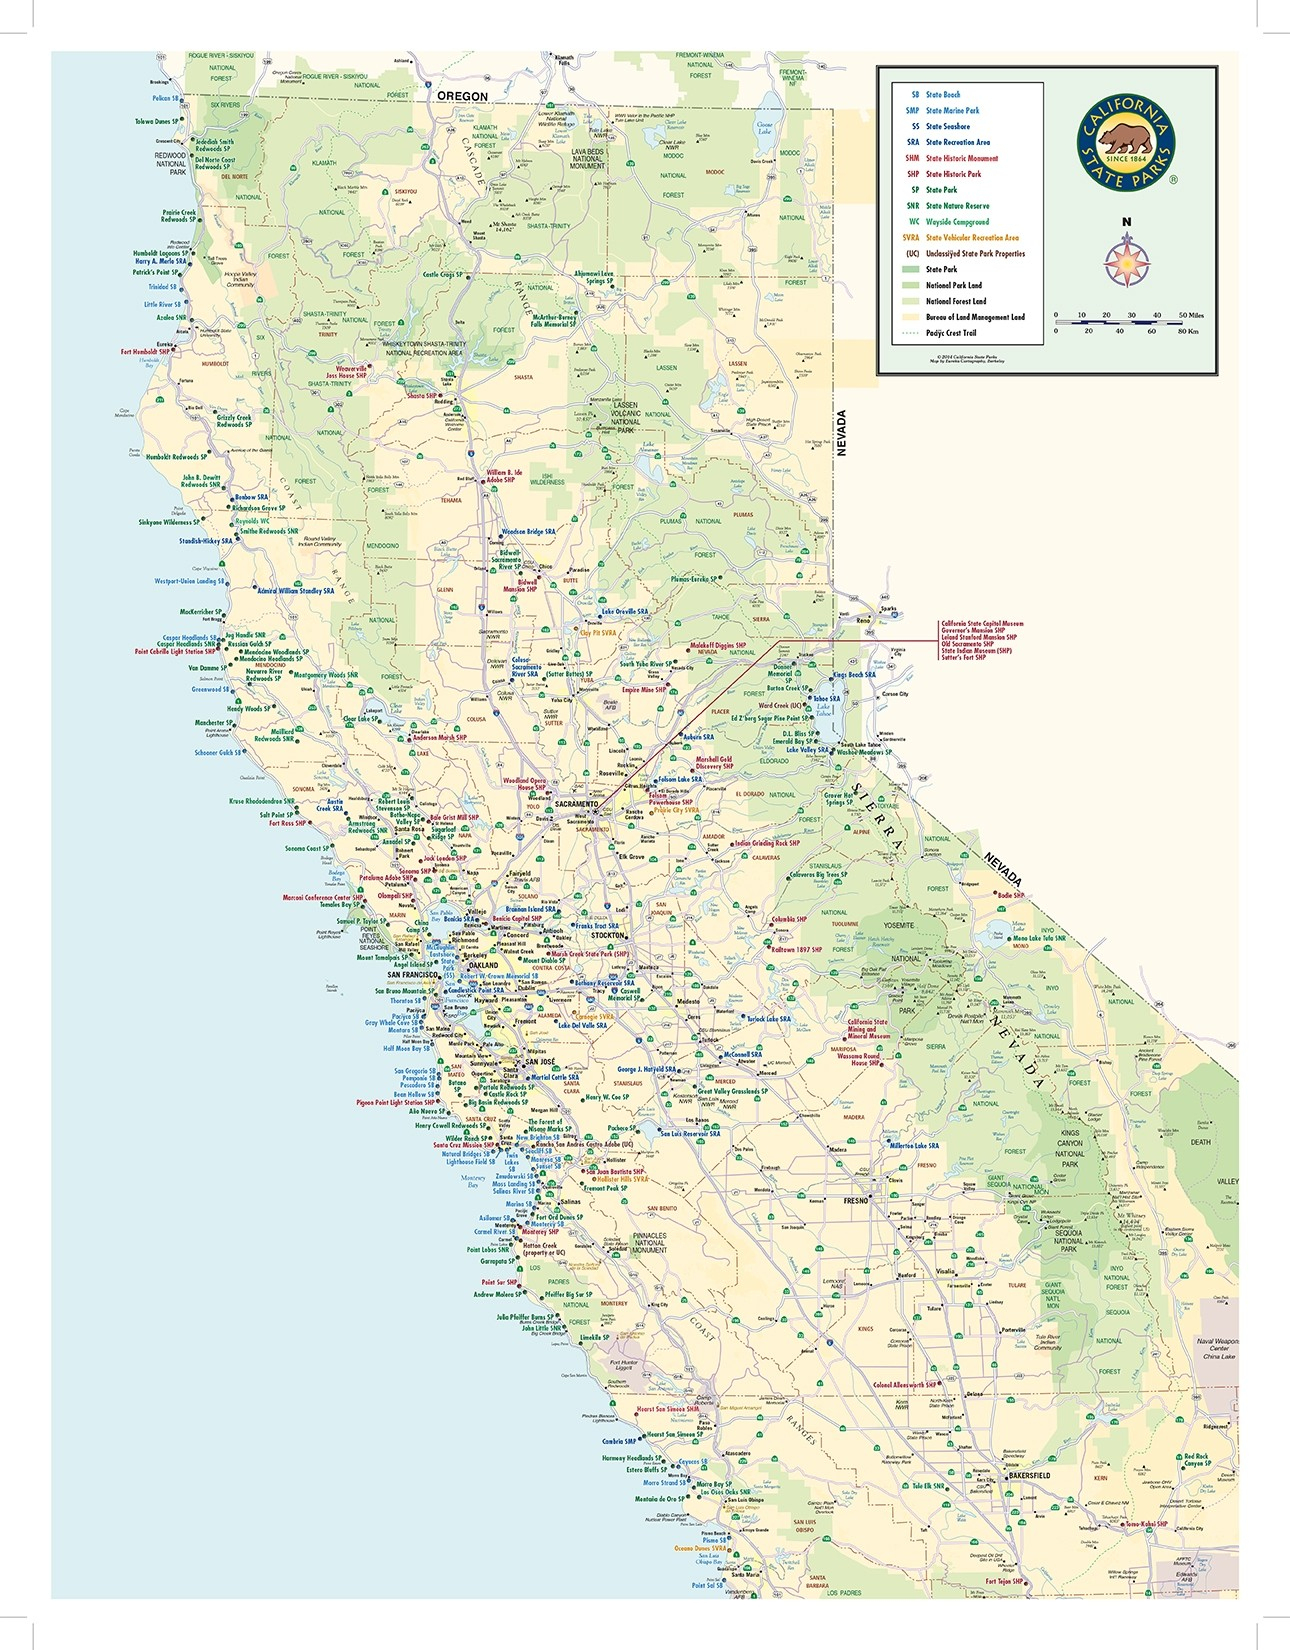 California State Parks Statewide Map - Map Of California Parks